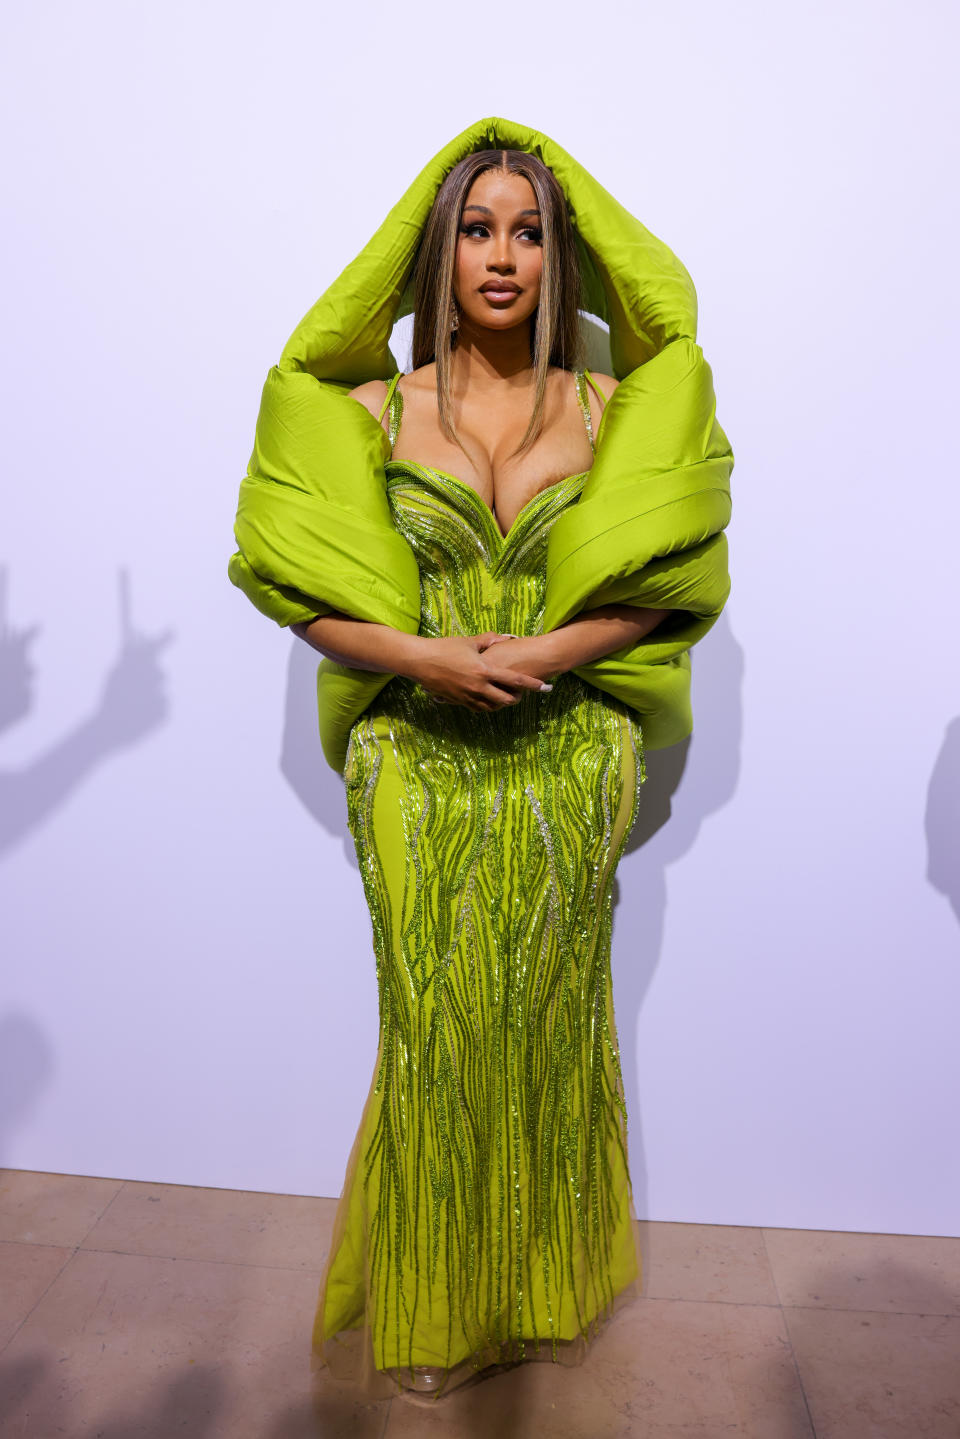 PARIS, FRANCE - JULY 06: (EDITORIAL USE ONLY - For Non-Editorial use please seek approval from Fashion House) Cardi B attends the Gaurav Gupta Haute Couture Fall/Winter 2023/2024 show as part of Paris Fashion Week on July 06, 2023 in Paris, France. (Photo by Pierre Suu/Getty Images)